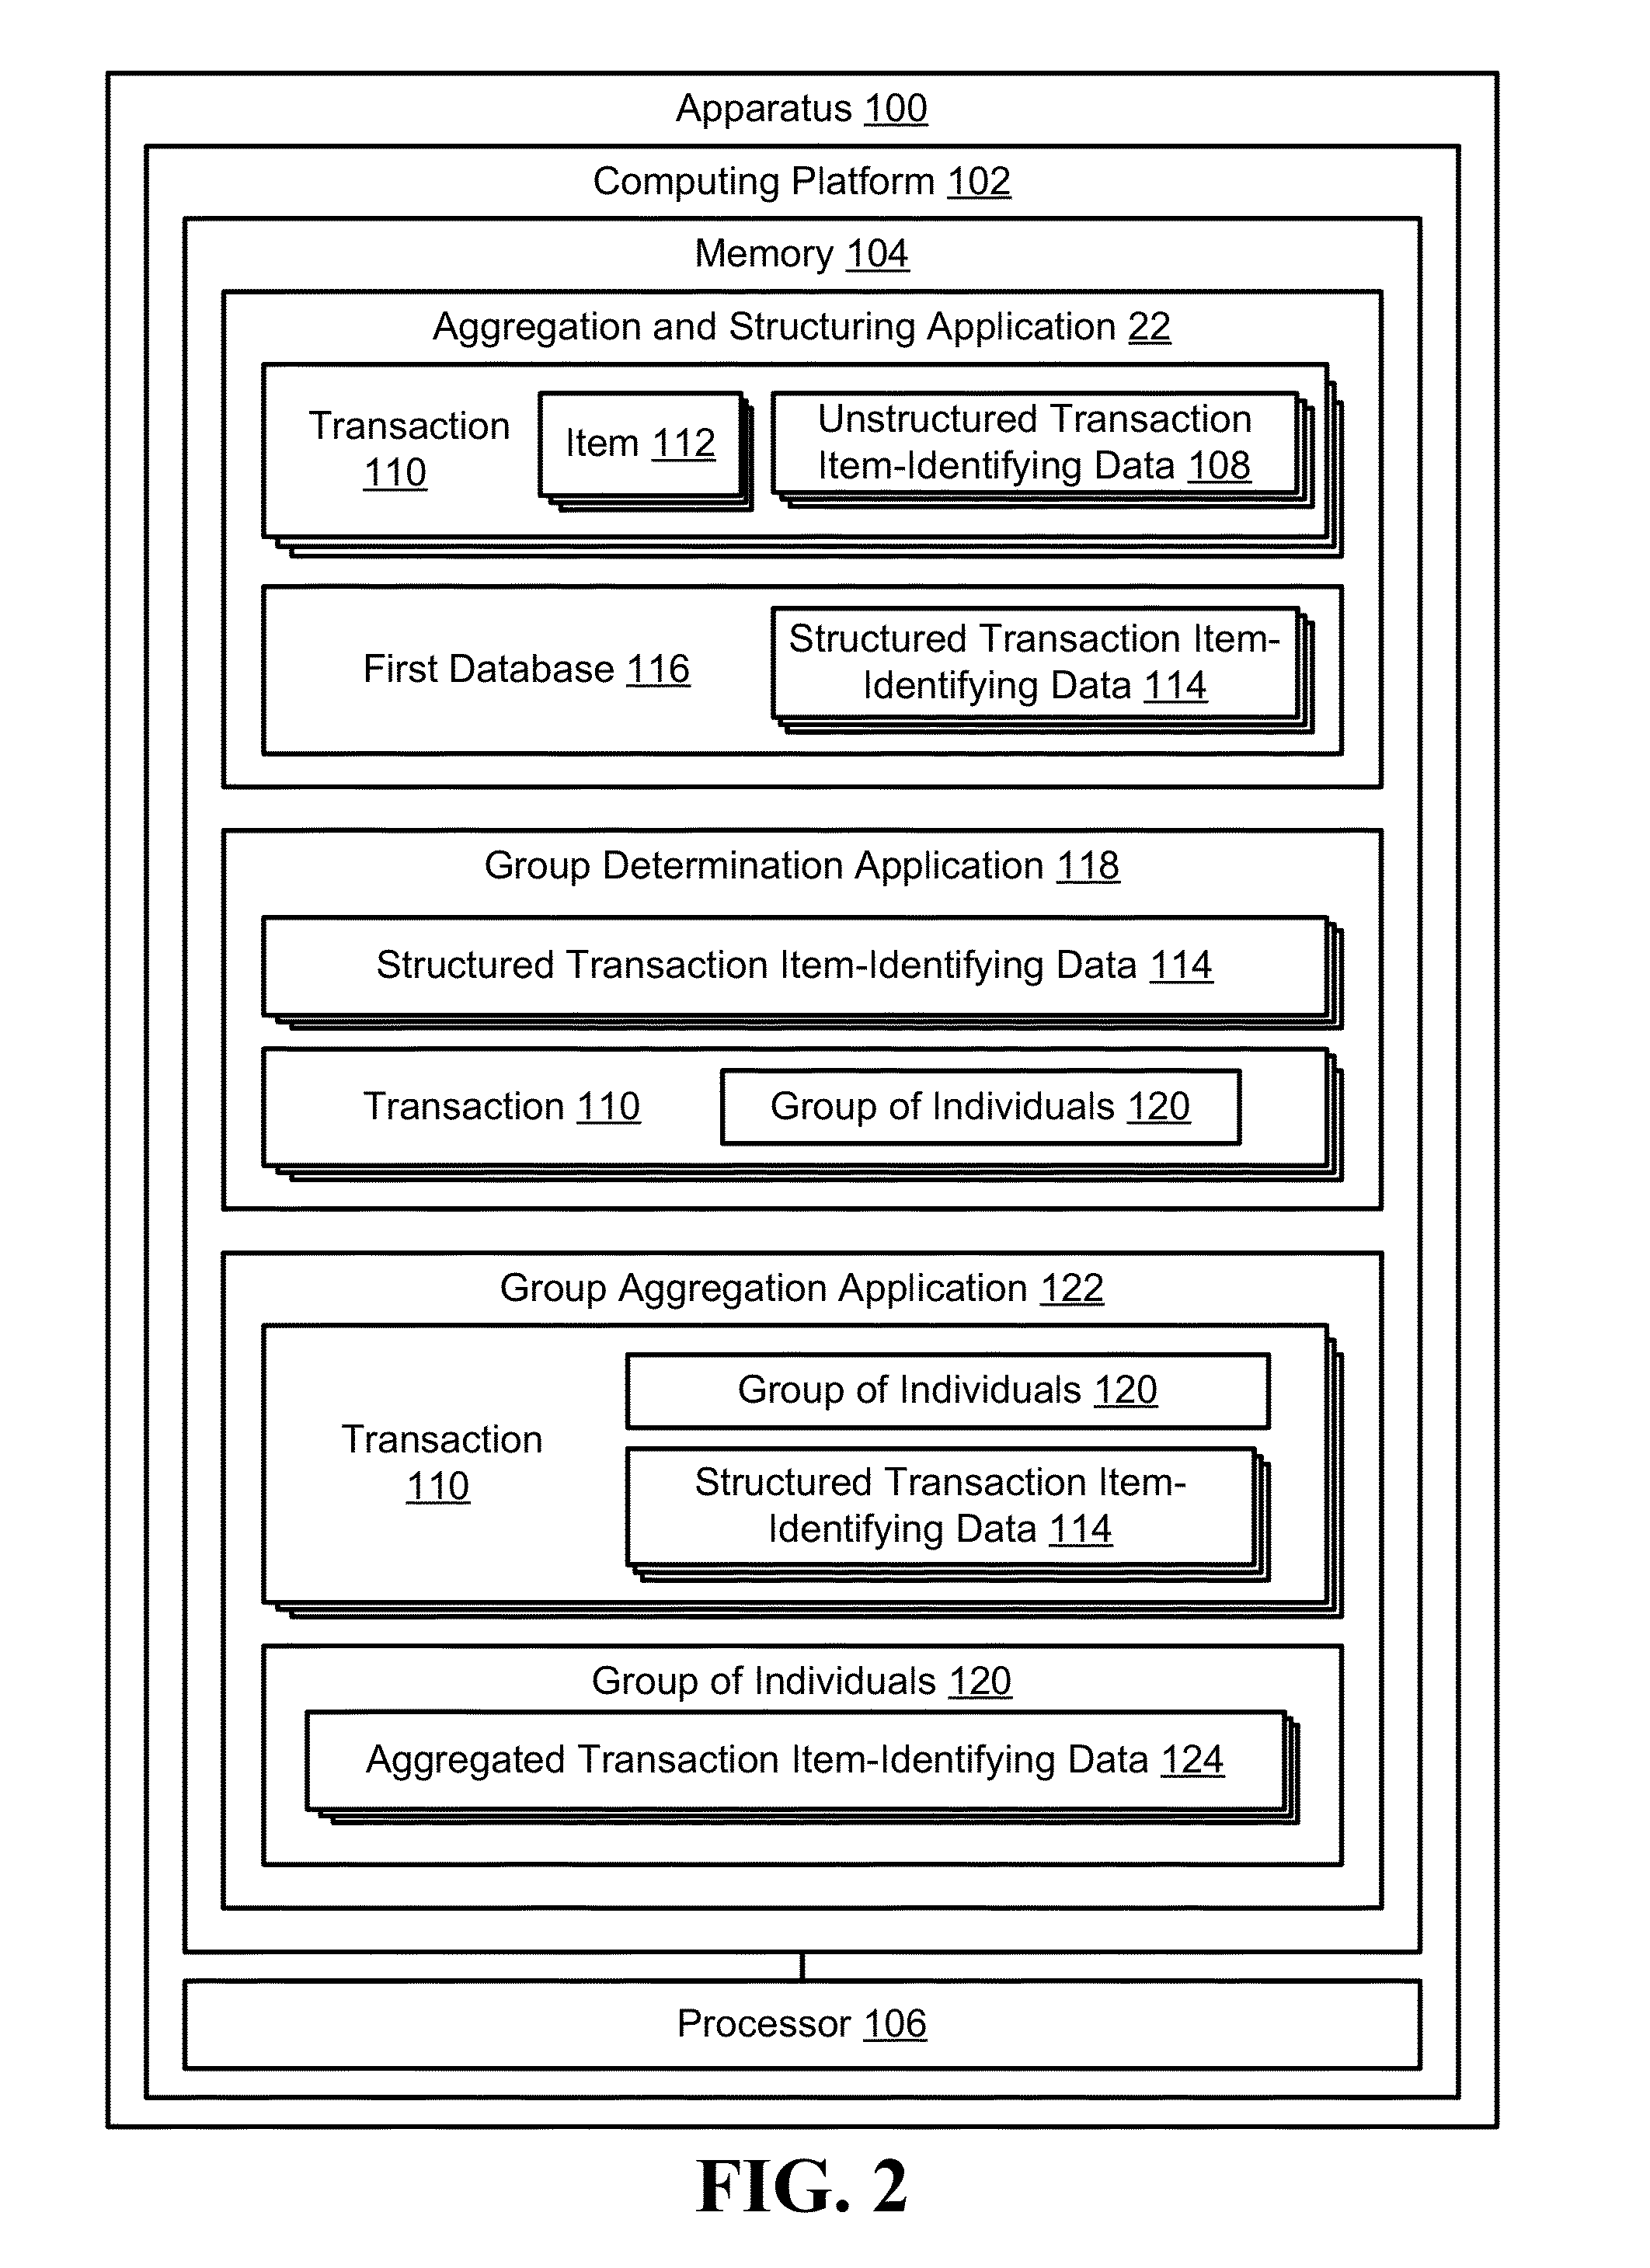 Aggregation of item-level transaction data for a group of individuals